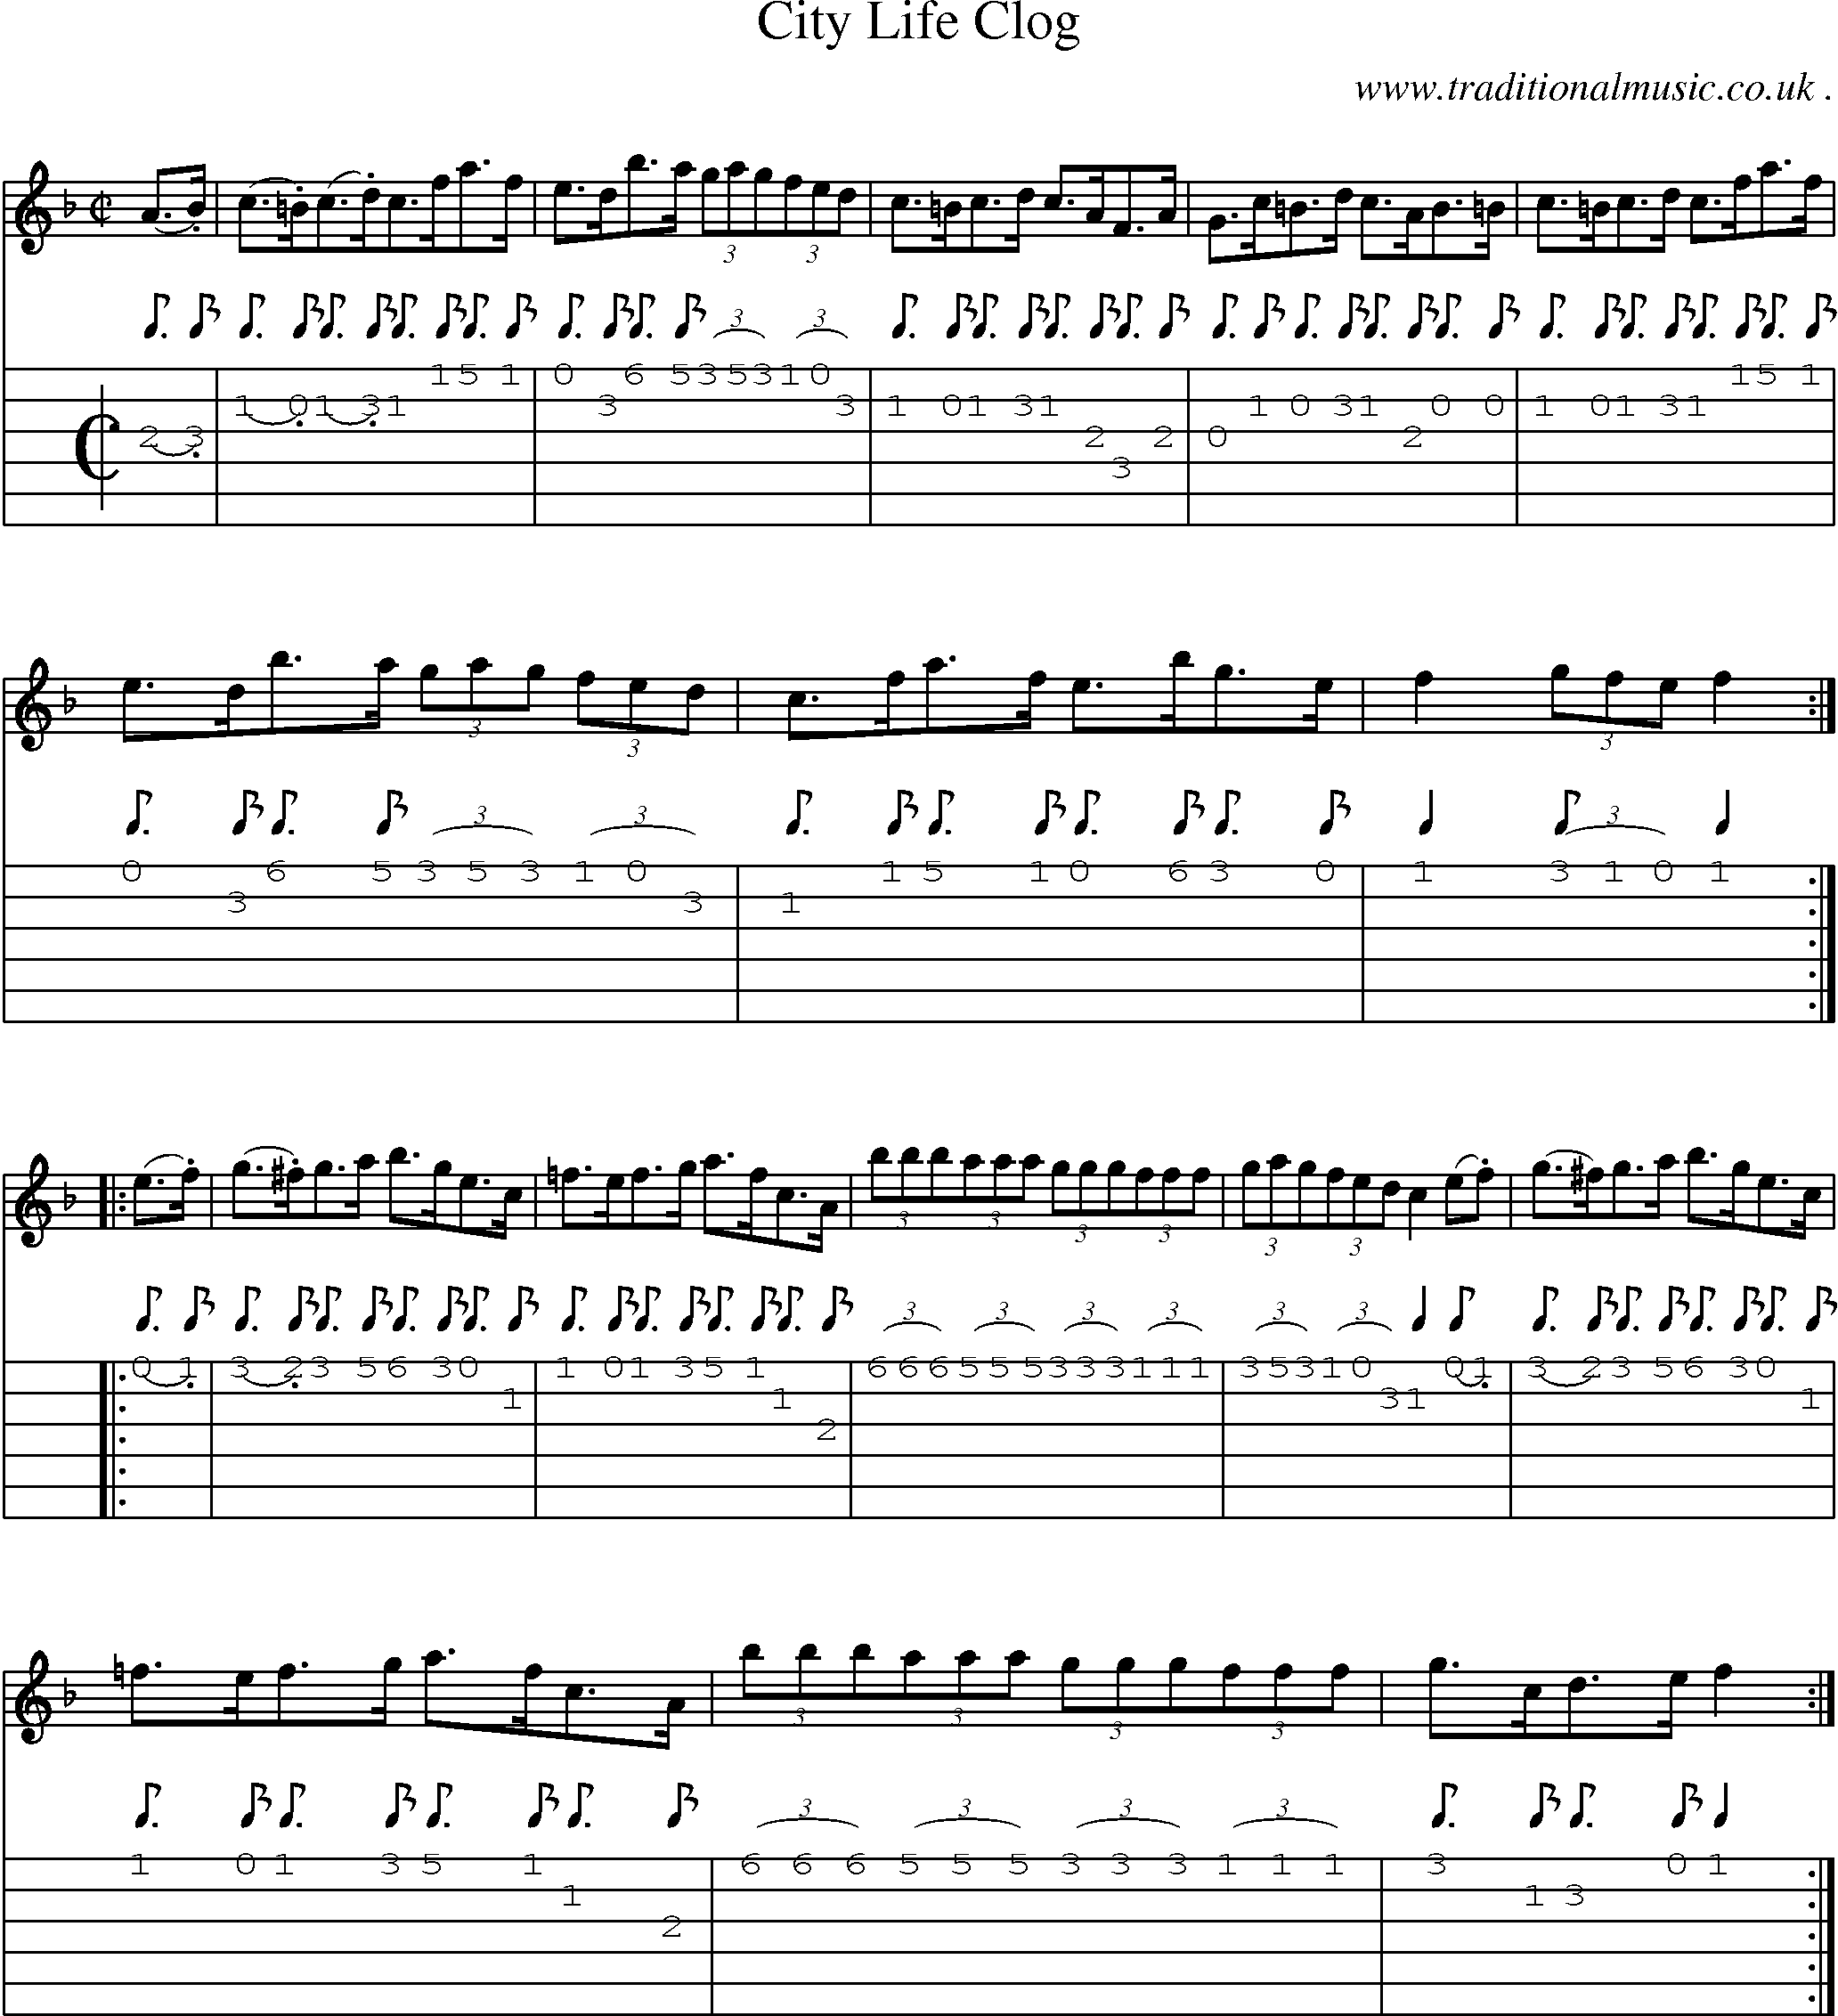 Sheet-Music and Guitar Tabs for City Life Clog